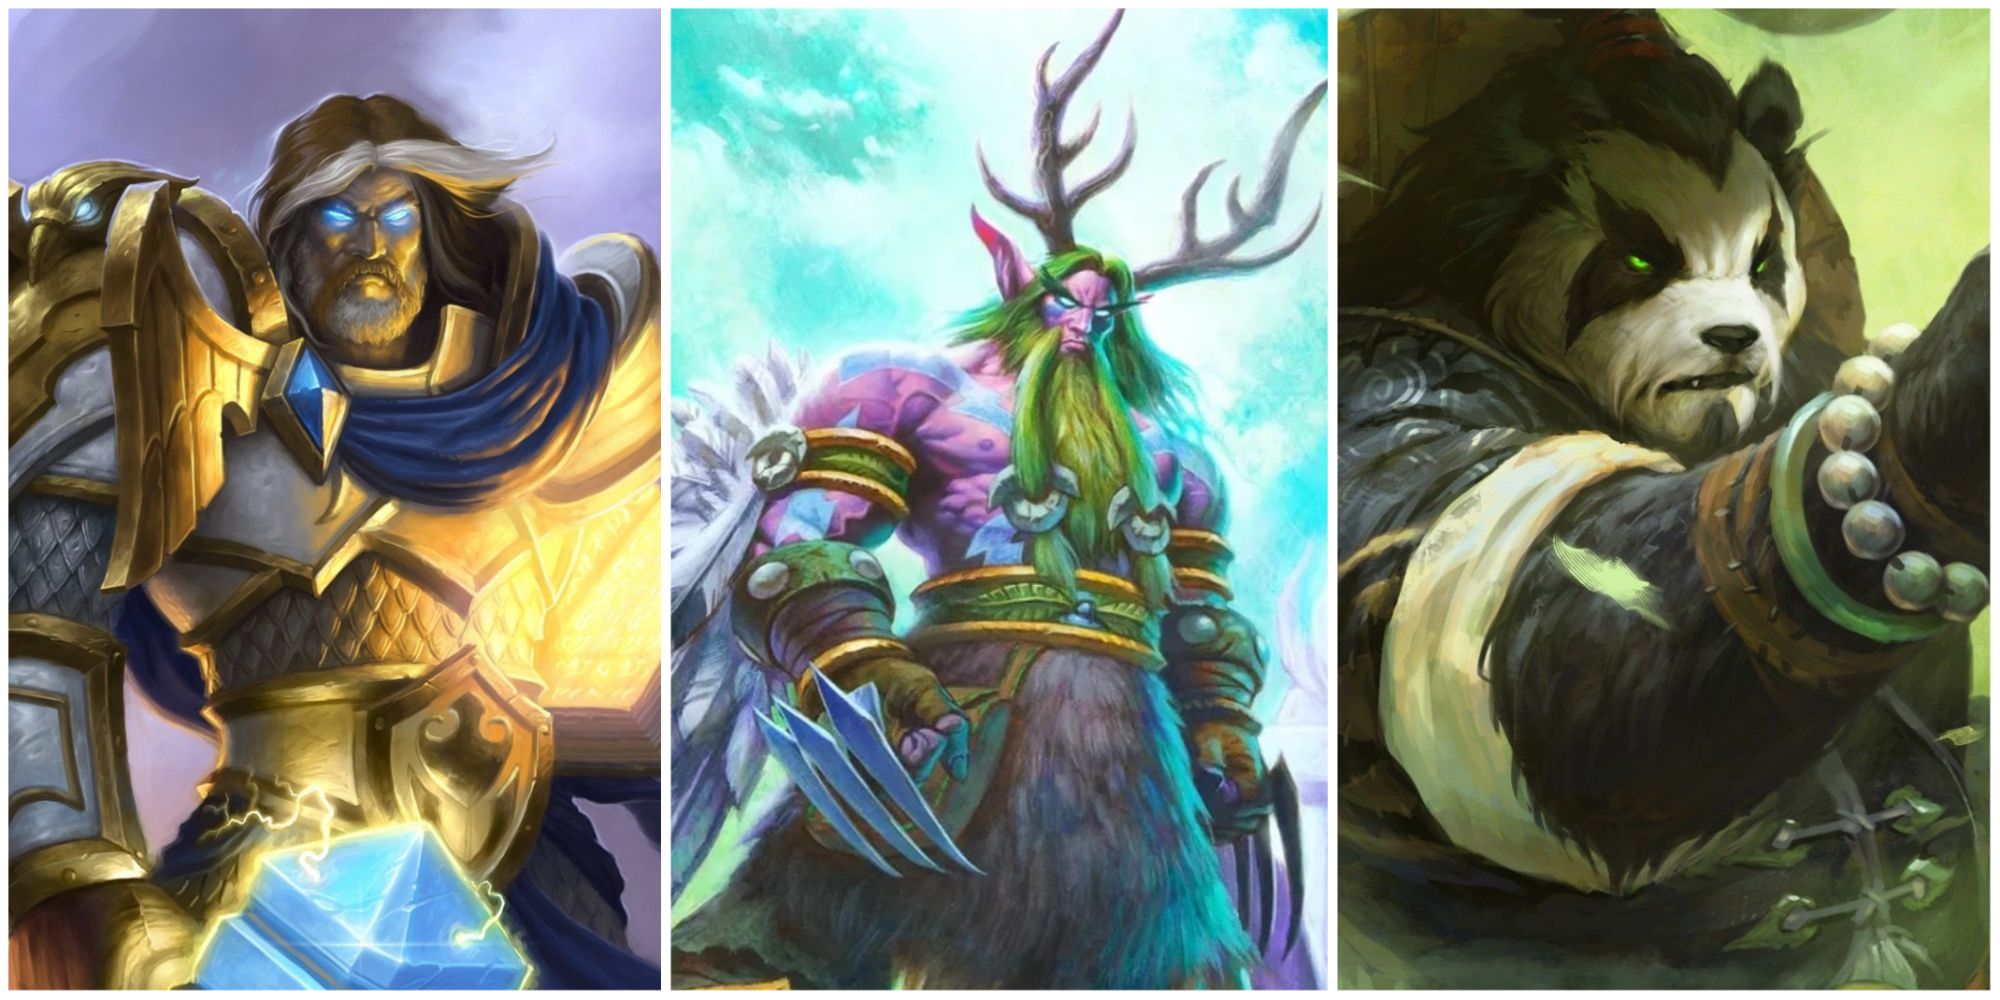 World Of Warcraft collage of Uther, Malfurion, and Pandarin